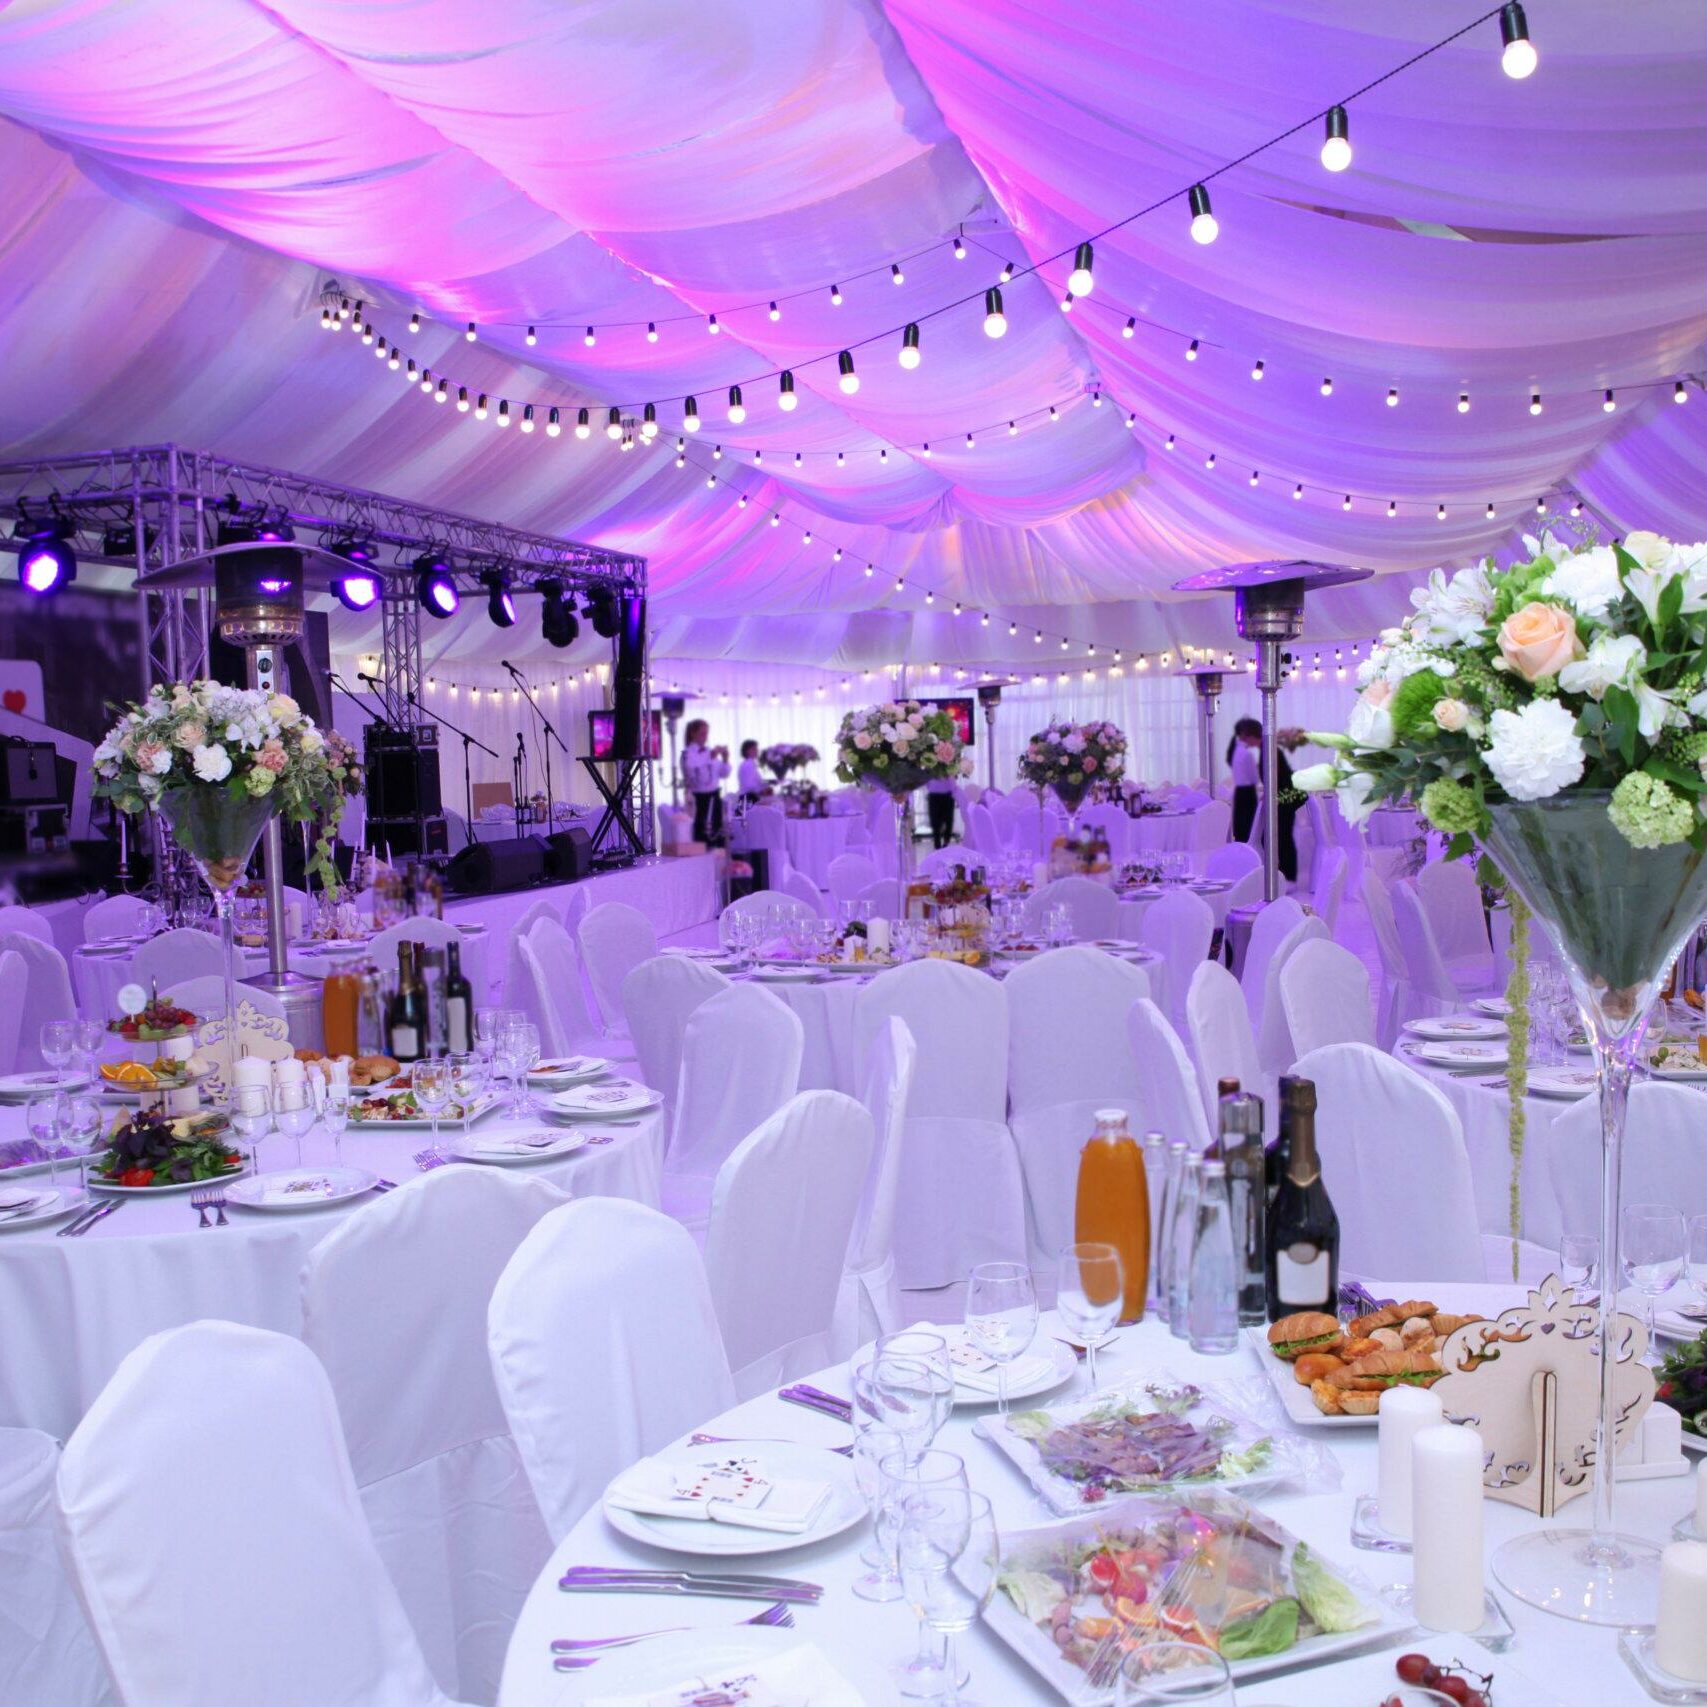 In the outdoor wedding tent, the wedding hall awaits the arrival of guests, featuring white chairs and elegant decor, setting the stage for a perfect and memorable celebration.